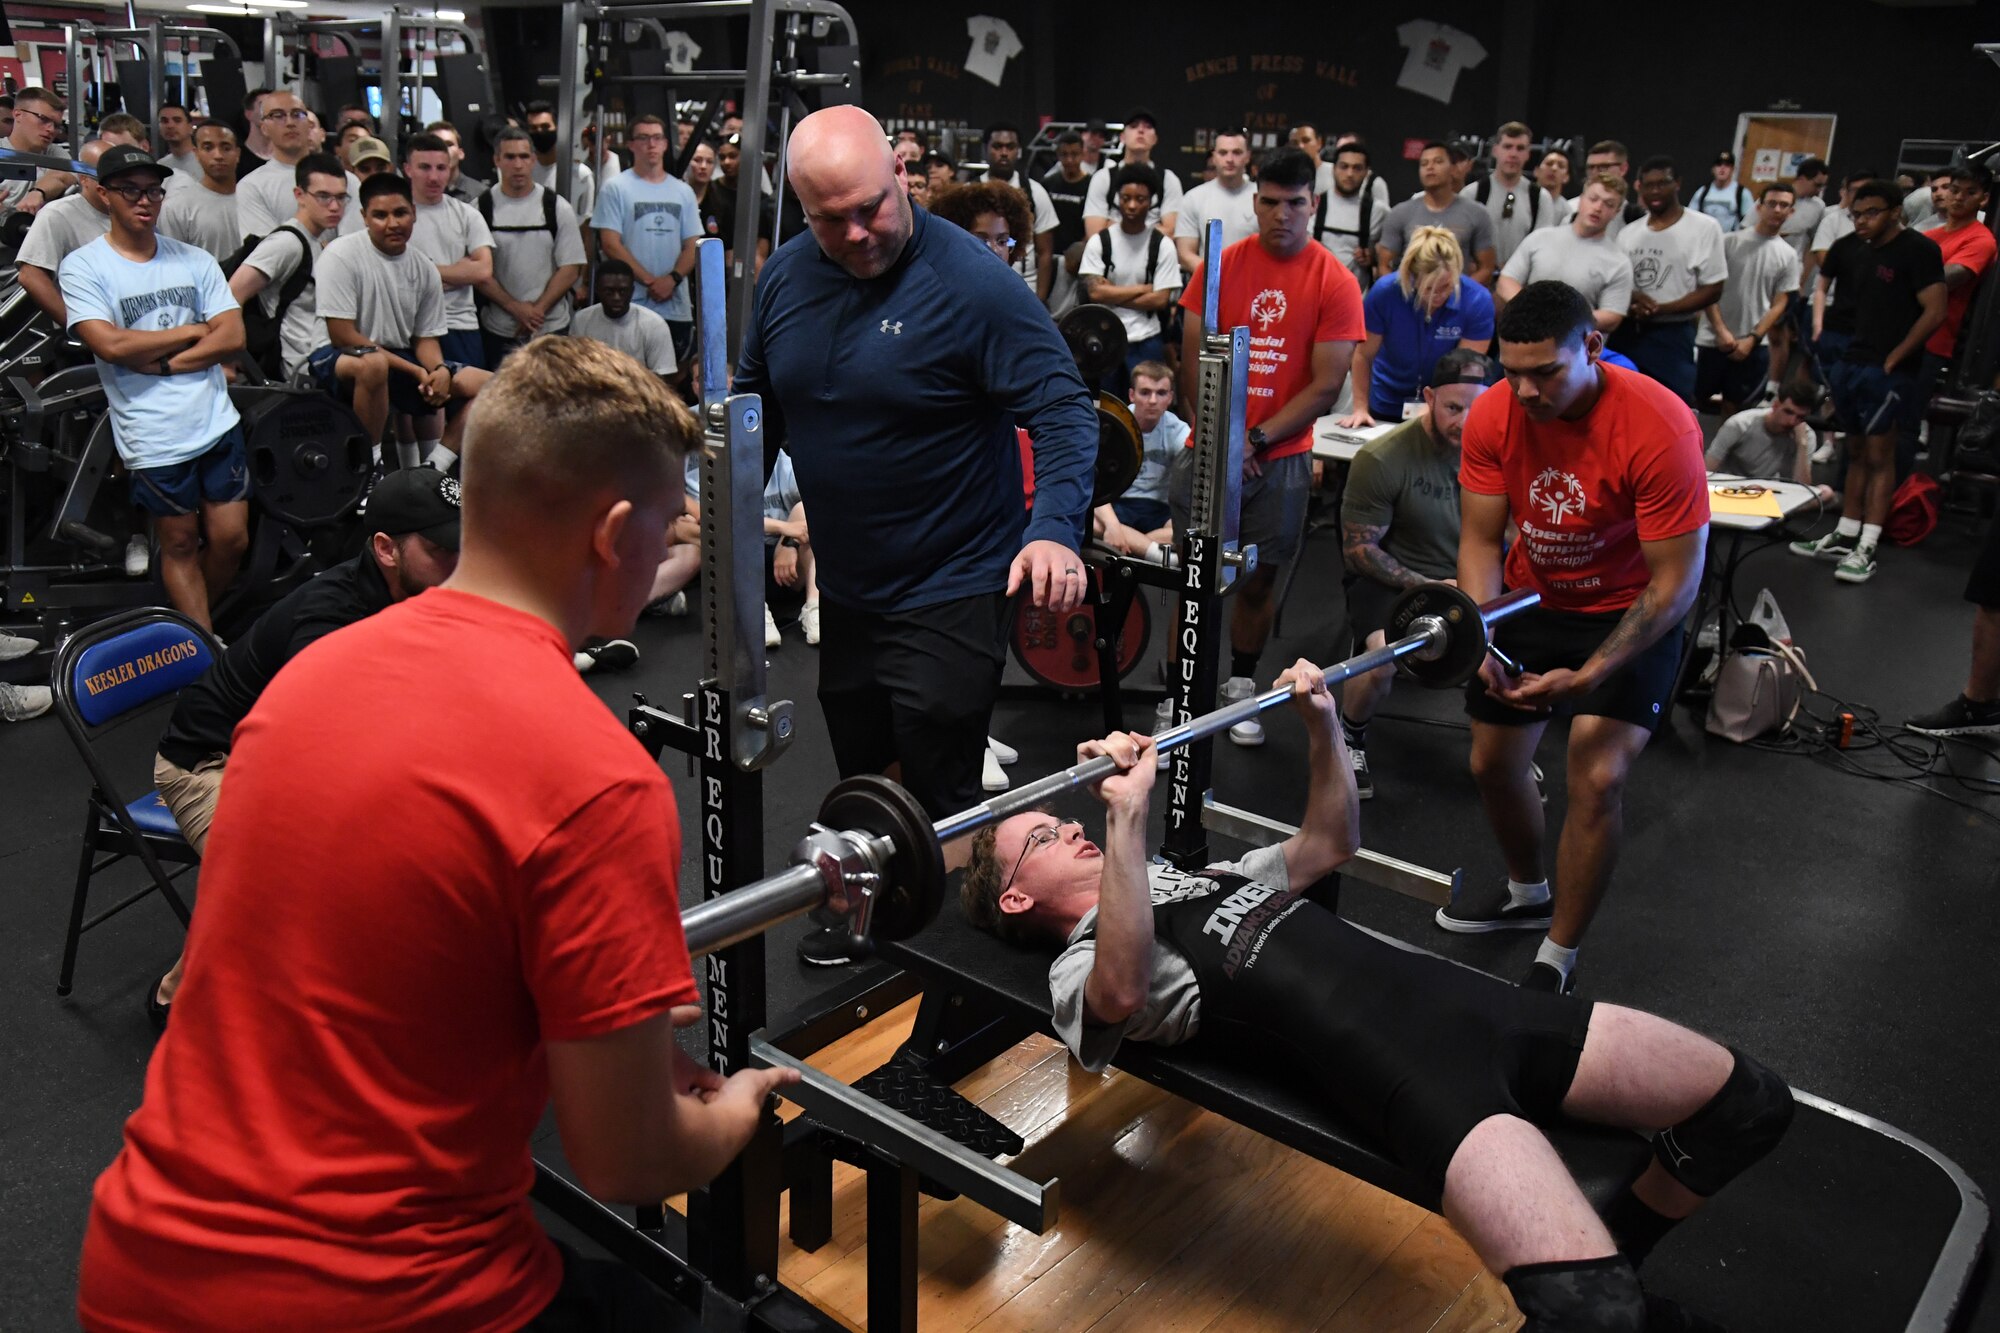 Connor Tingle, Area 12 athlete, participates in powerlifting during the Special Olympics Mississippi Summer Games at Keesler Air Force Base, Miss., May 14, 2022. Over 600 athletes participated in the Summer Games. (U.S. Air Force photo by Kemberly Groue)